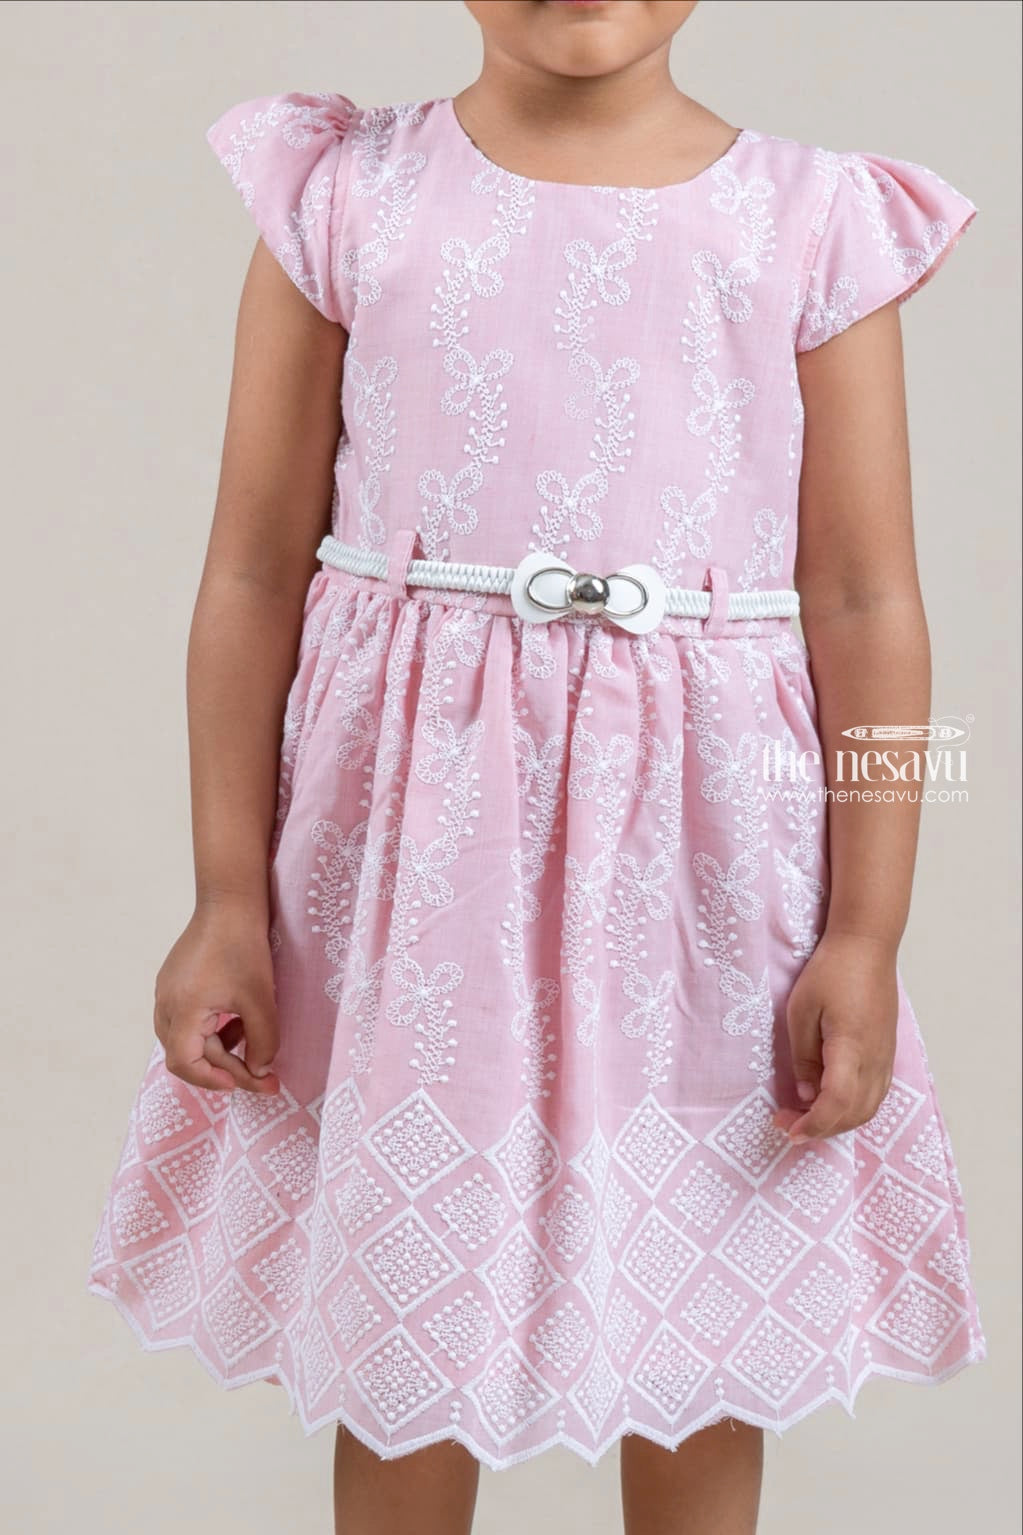 The Nesavu Baby Cotton Frocks Pretty Pink Floral Embroidered Baby Cotton Frock With Designer Belt Nesavu Latest Frock Gown For Baby Girls | Pink Frock Collection | The Nesavu